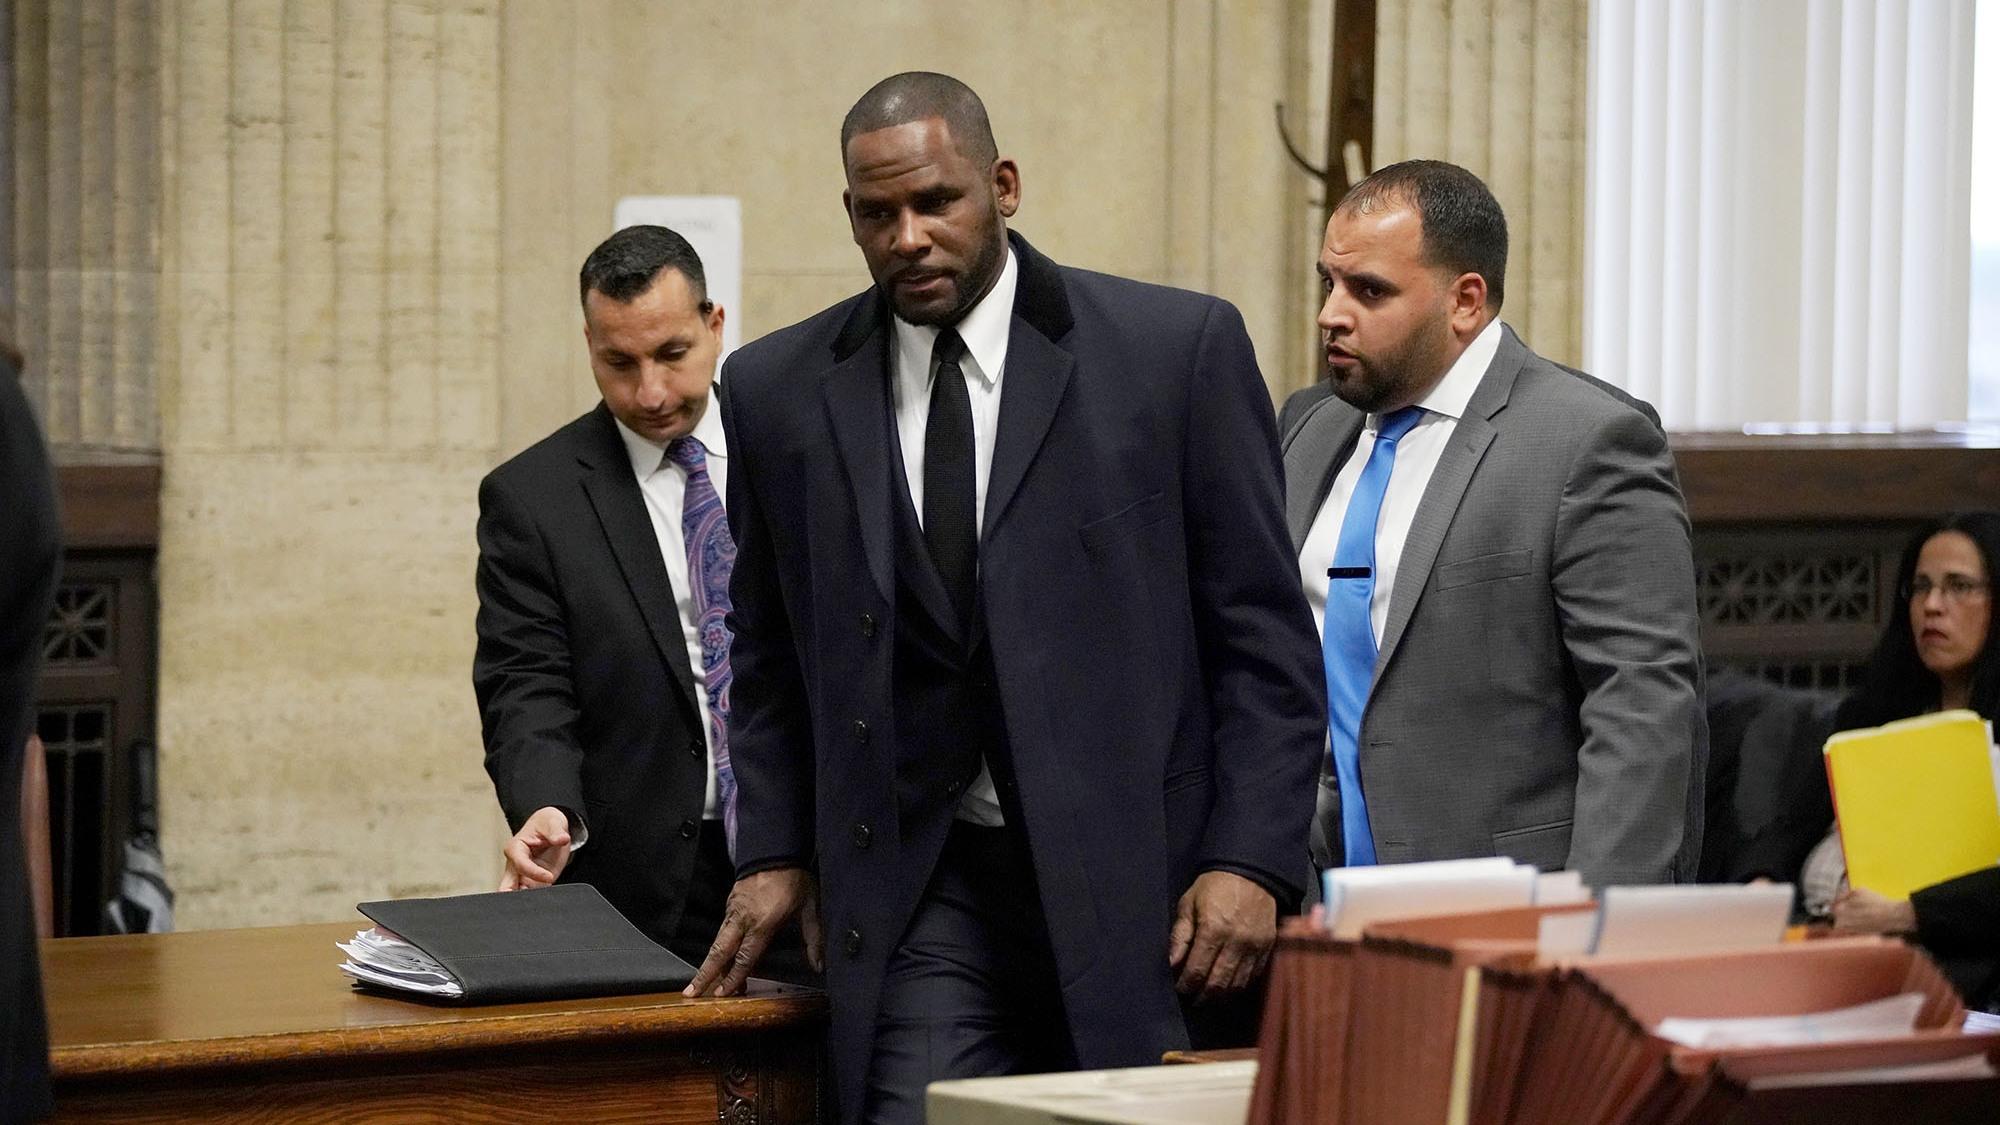 On Monday night, the final installment of “Surviving R. Kelly” began airing on Lifetime. R. Kelly, (C), here appears at a hearing in 2019 in Chicago, Illinois. (E. Jason Wambsgans / Getty Images)